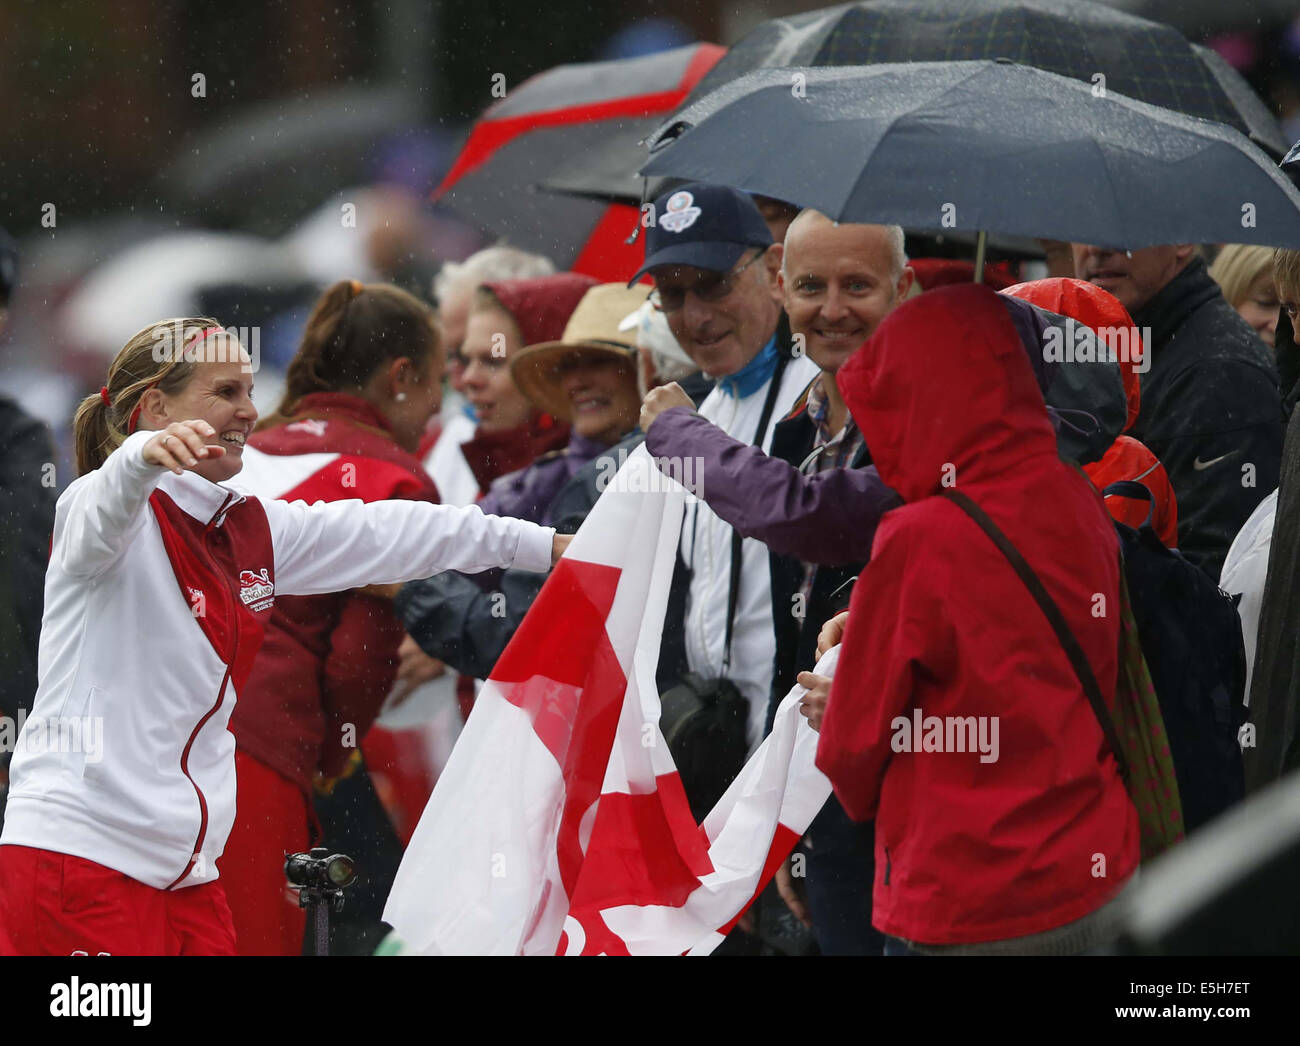 Glasgow, Scotland. 31st July, 2014. Ellen Falkner (L) of England celebrates with friends after the women's triples gold medal match of Lawn Bowls between England and Australia on day 8 of the Glasgow 2014 Commonwealth Games at Kelvingrove Lawn Bowls Centre in Glasgow, Scotland, on July 31, 2014. England claimed the title with 22-4. Credit:  Wang Lili/Xinhua/Alamy Live News Stock Photo